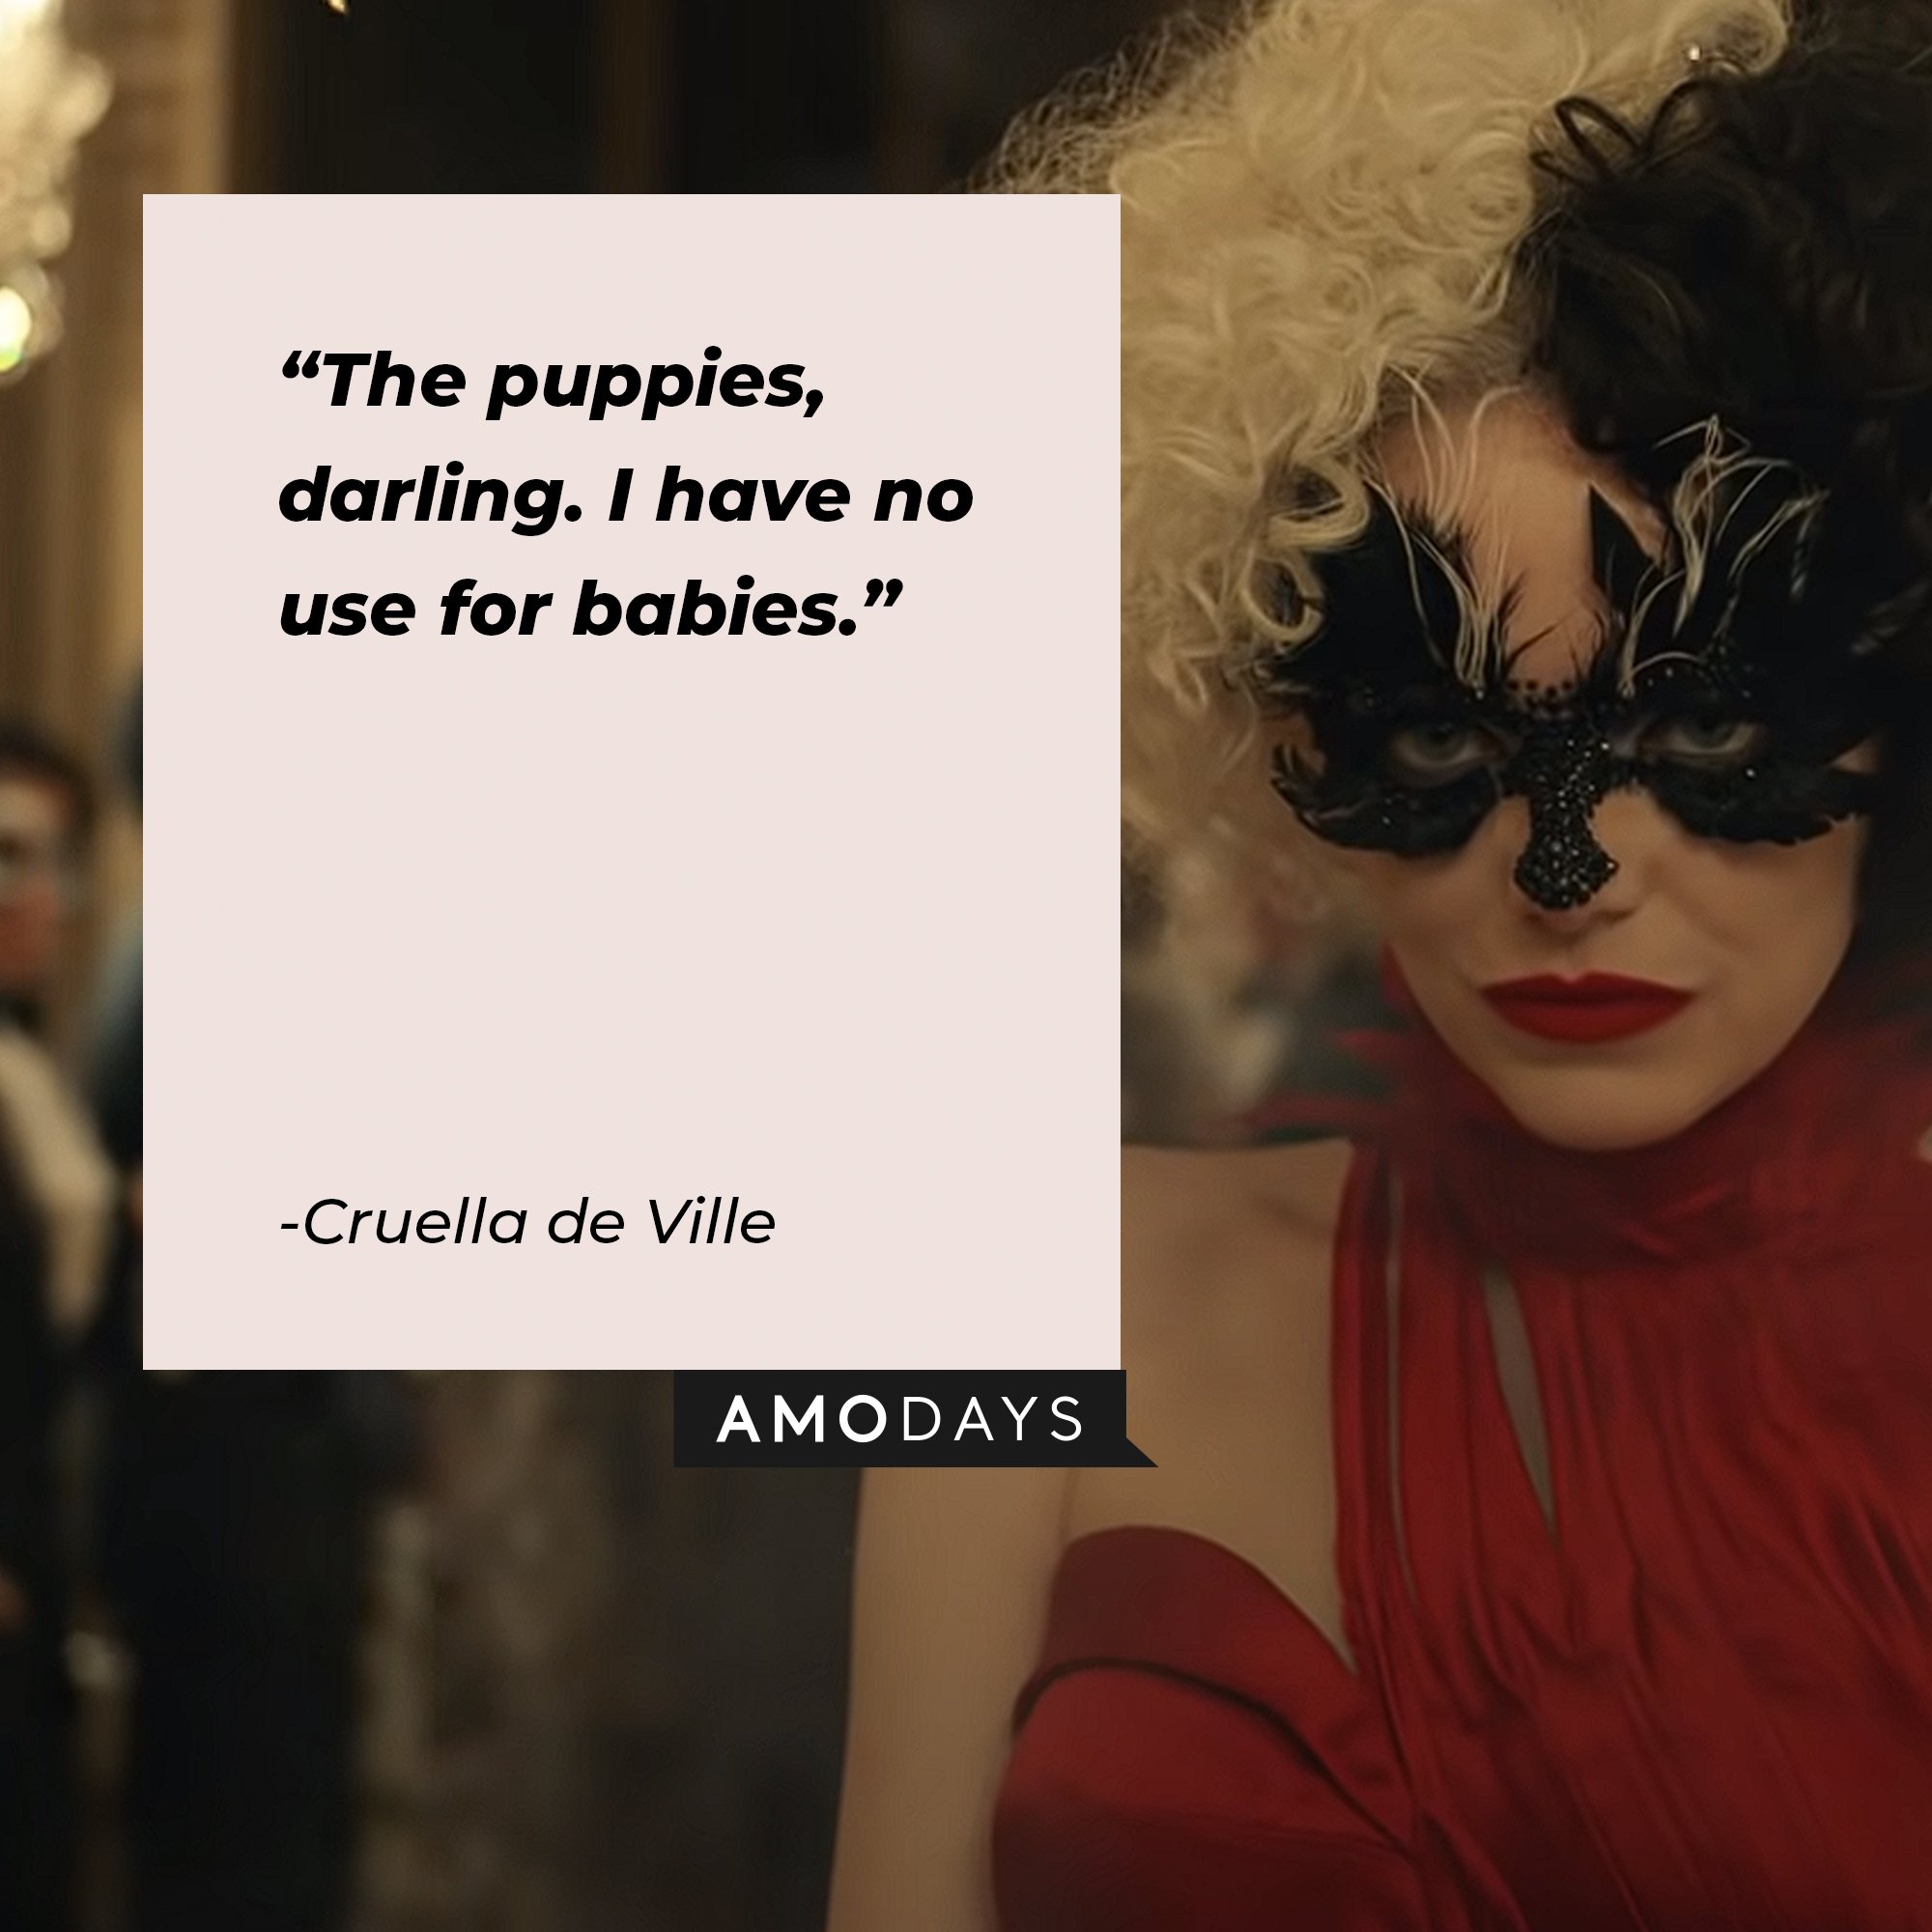 Cruella de Ville’s quote: “The puppies, darling. I have no use for babies.” | Image: AmoDays